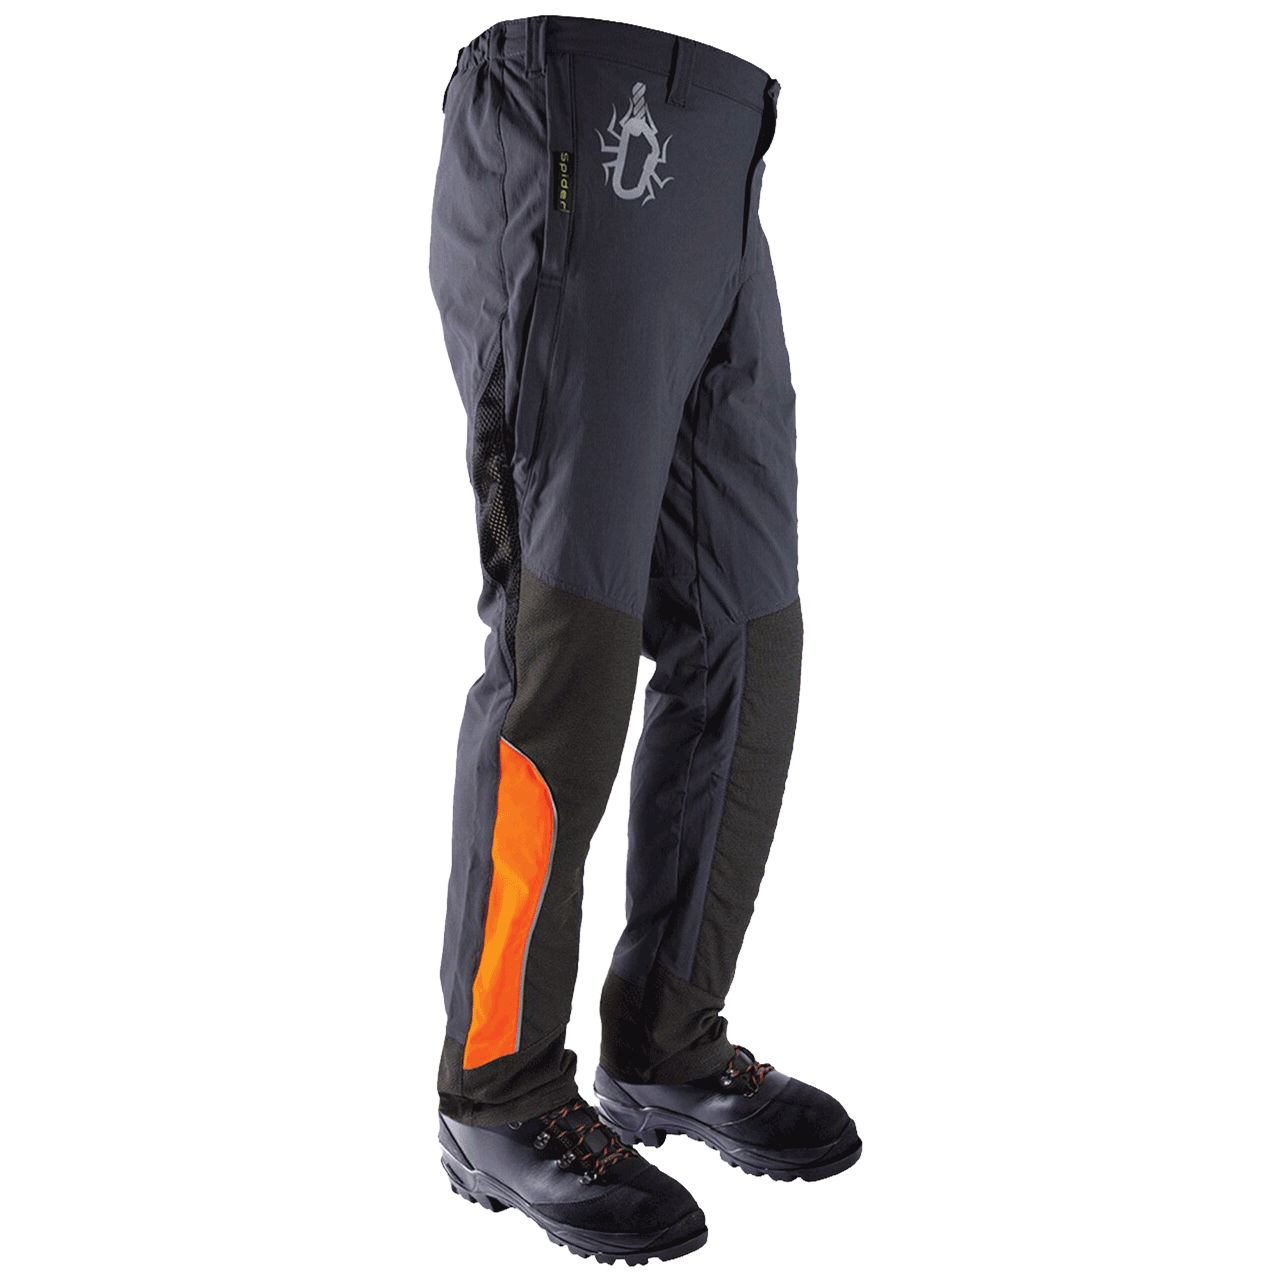 Spider Clogger Climbing Trousers